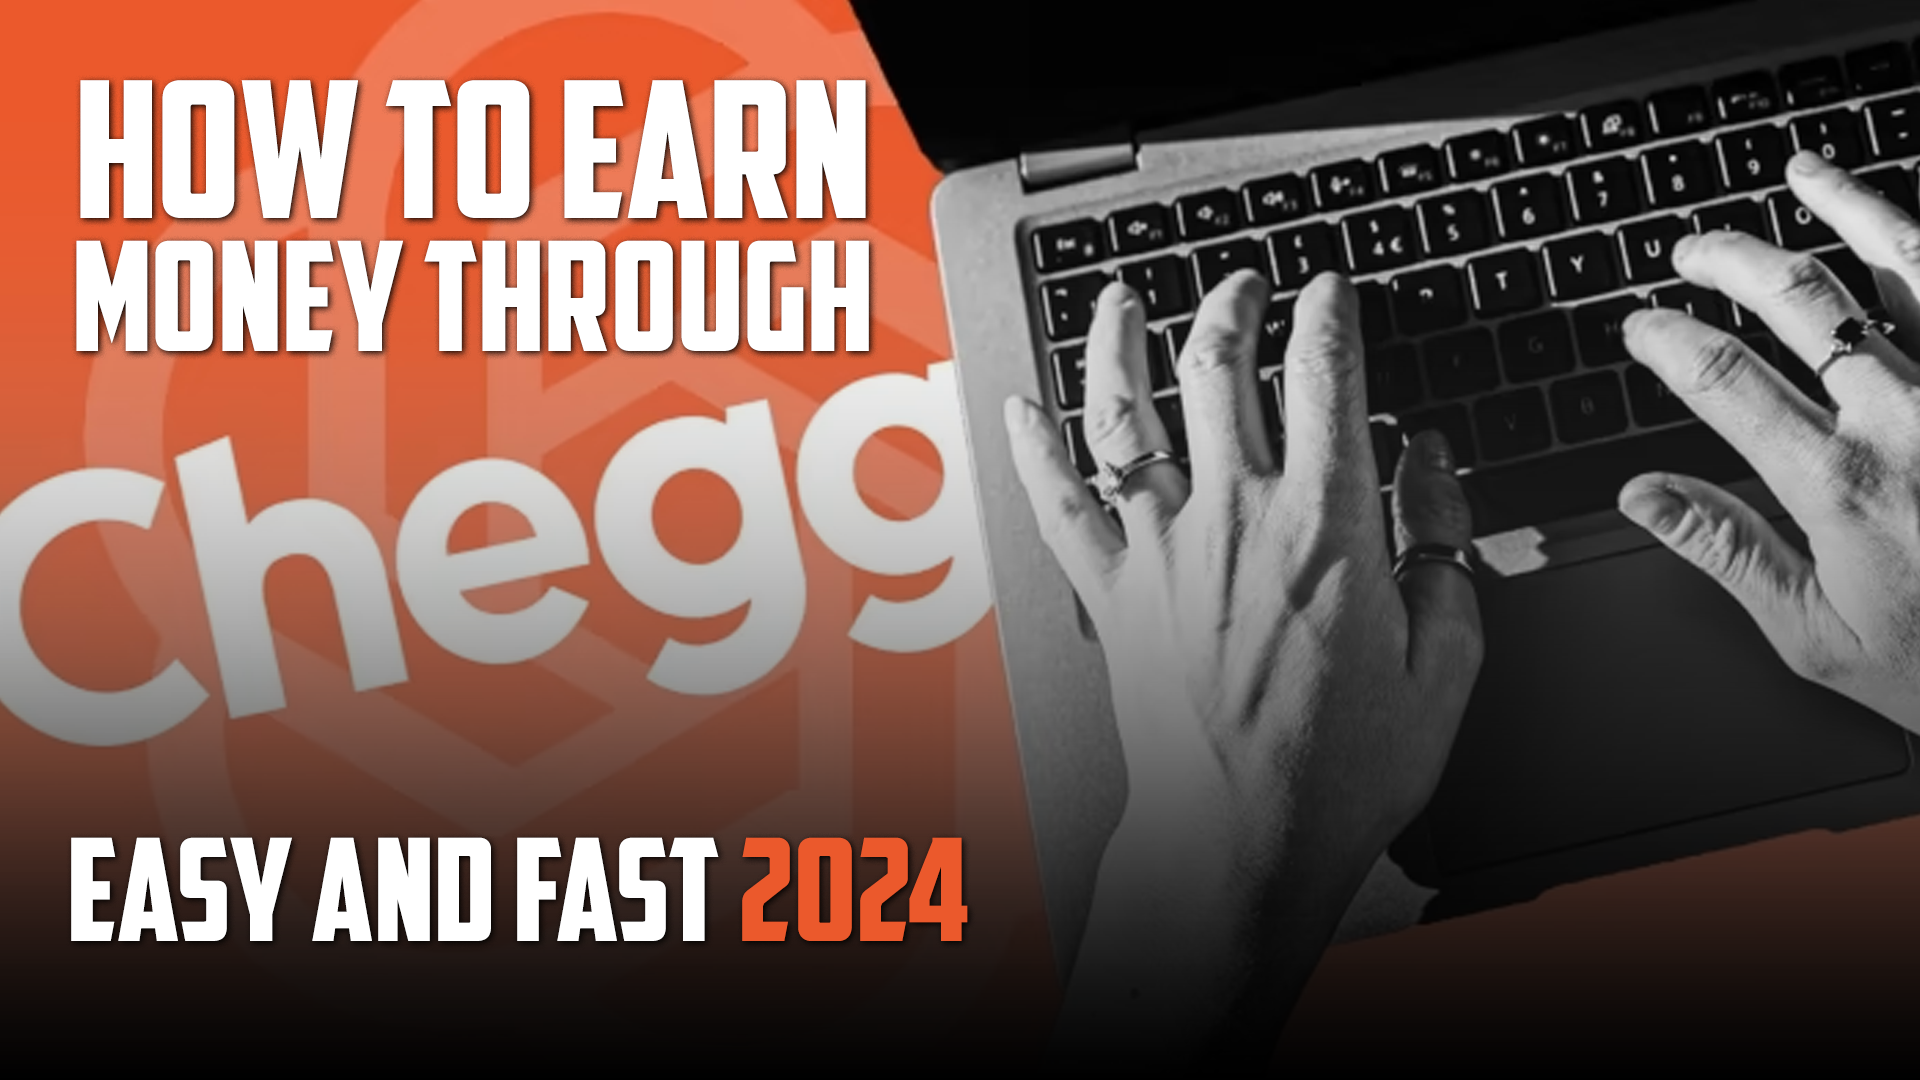 How To earn money through Chegg: Easy and Fast 2024